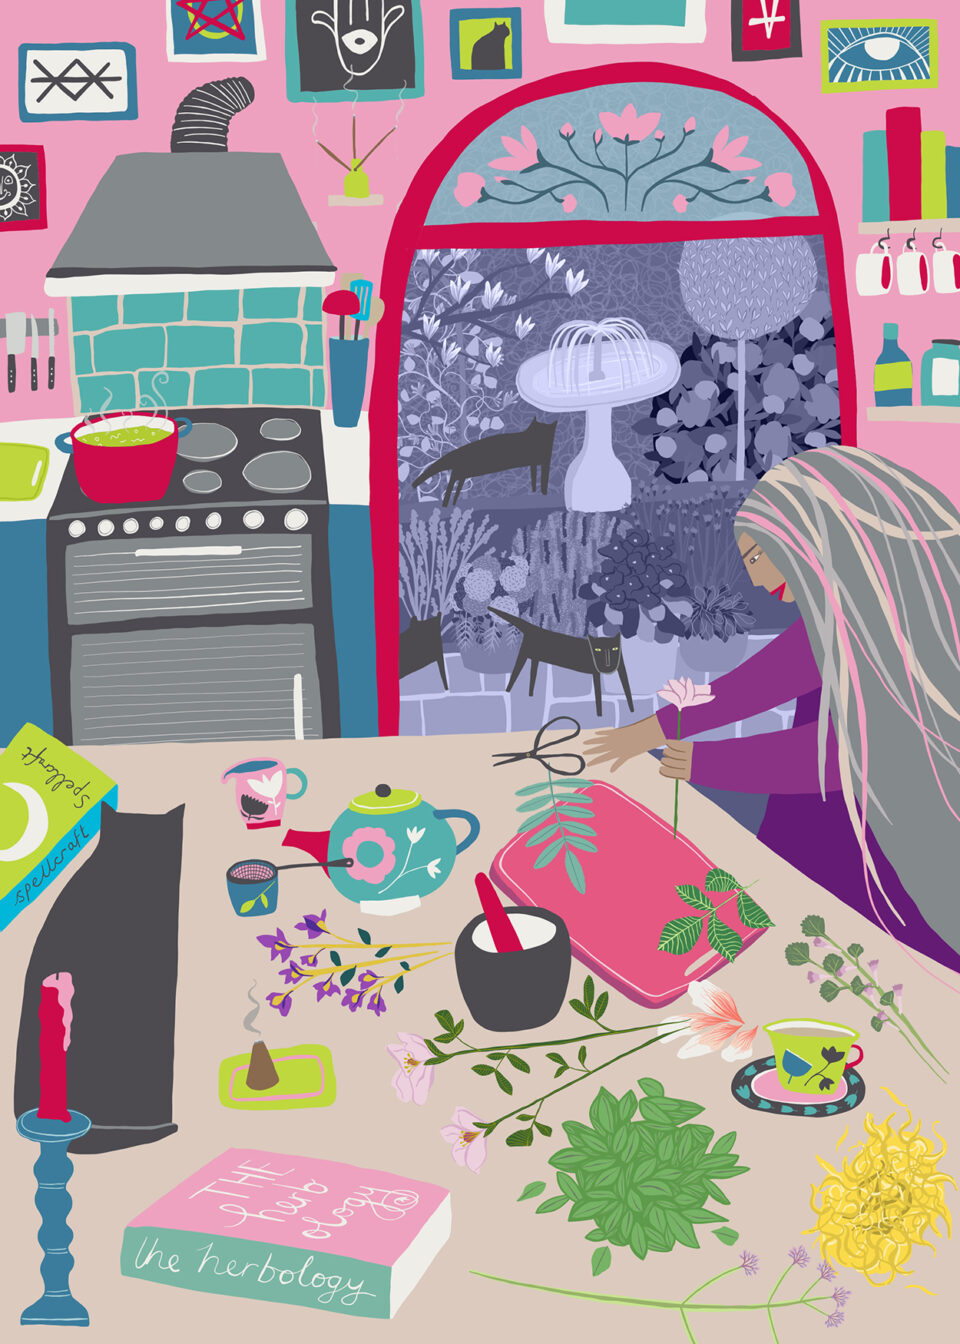 An illustration of a modern witch in her kitchen with her night-time herb garden in the background. A cooker is heating up a pan of something. On the kitchen table are spell and herb books, a black cat, a teapot, tea strainer, milk jug and cup and saucer, a chopping board and lots of cuttings from herbs and flowers. The witch has grey hair with colourful streaks and wears purple clothes. She has medium brown skin and she is reaching for some houseplant scissors and holding a flower. In the garden you can see a fountain, three black cats, and a variety of trees and flowers and herb bushes. Illustrated by Tasha Goddard.